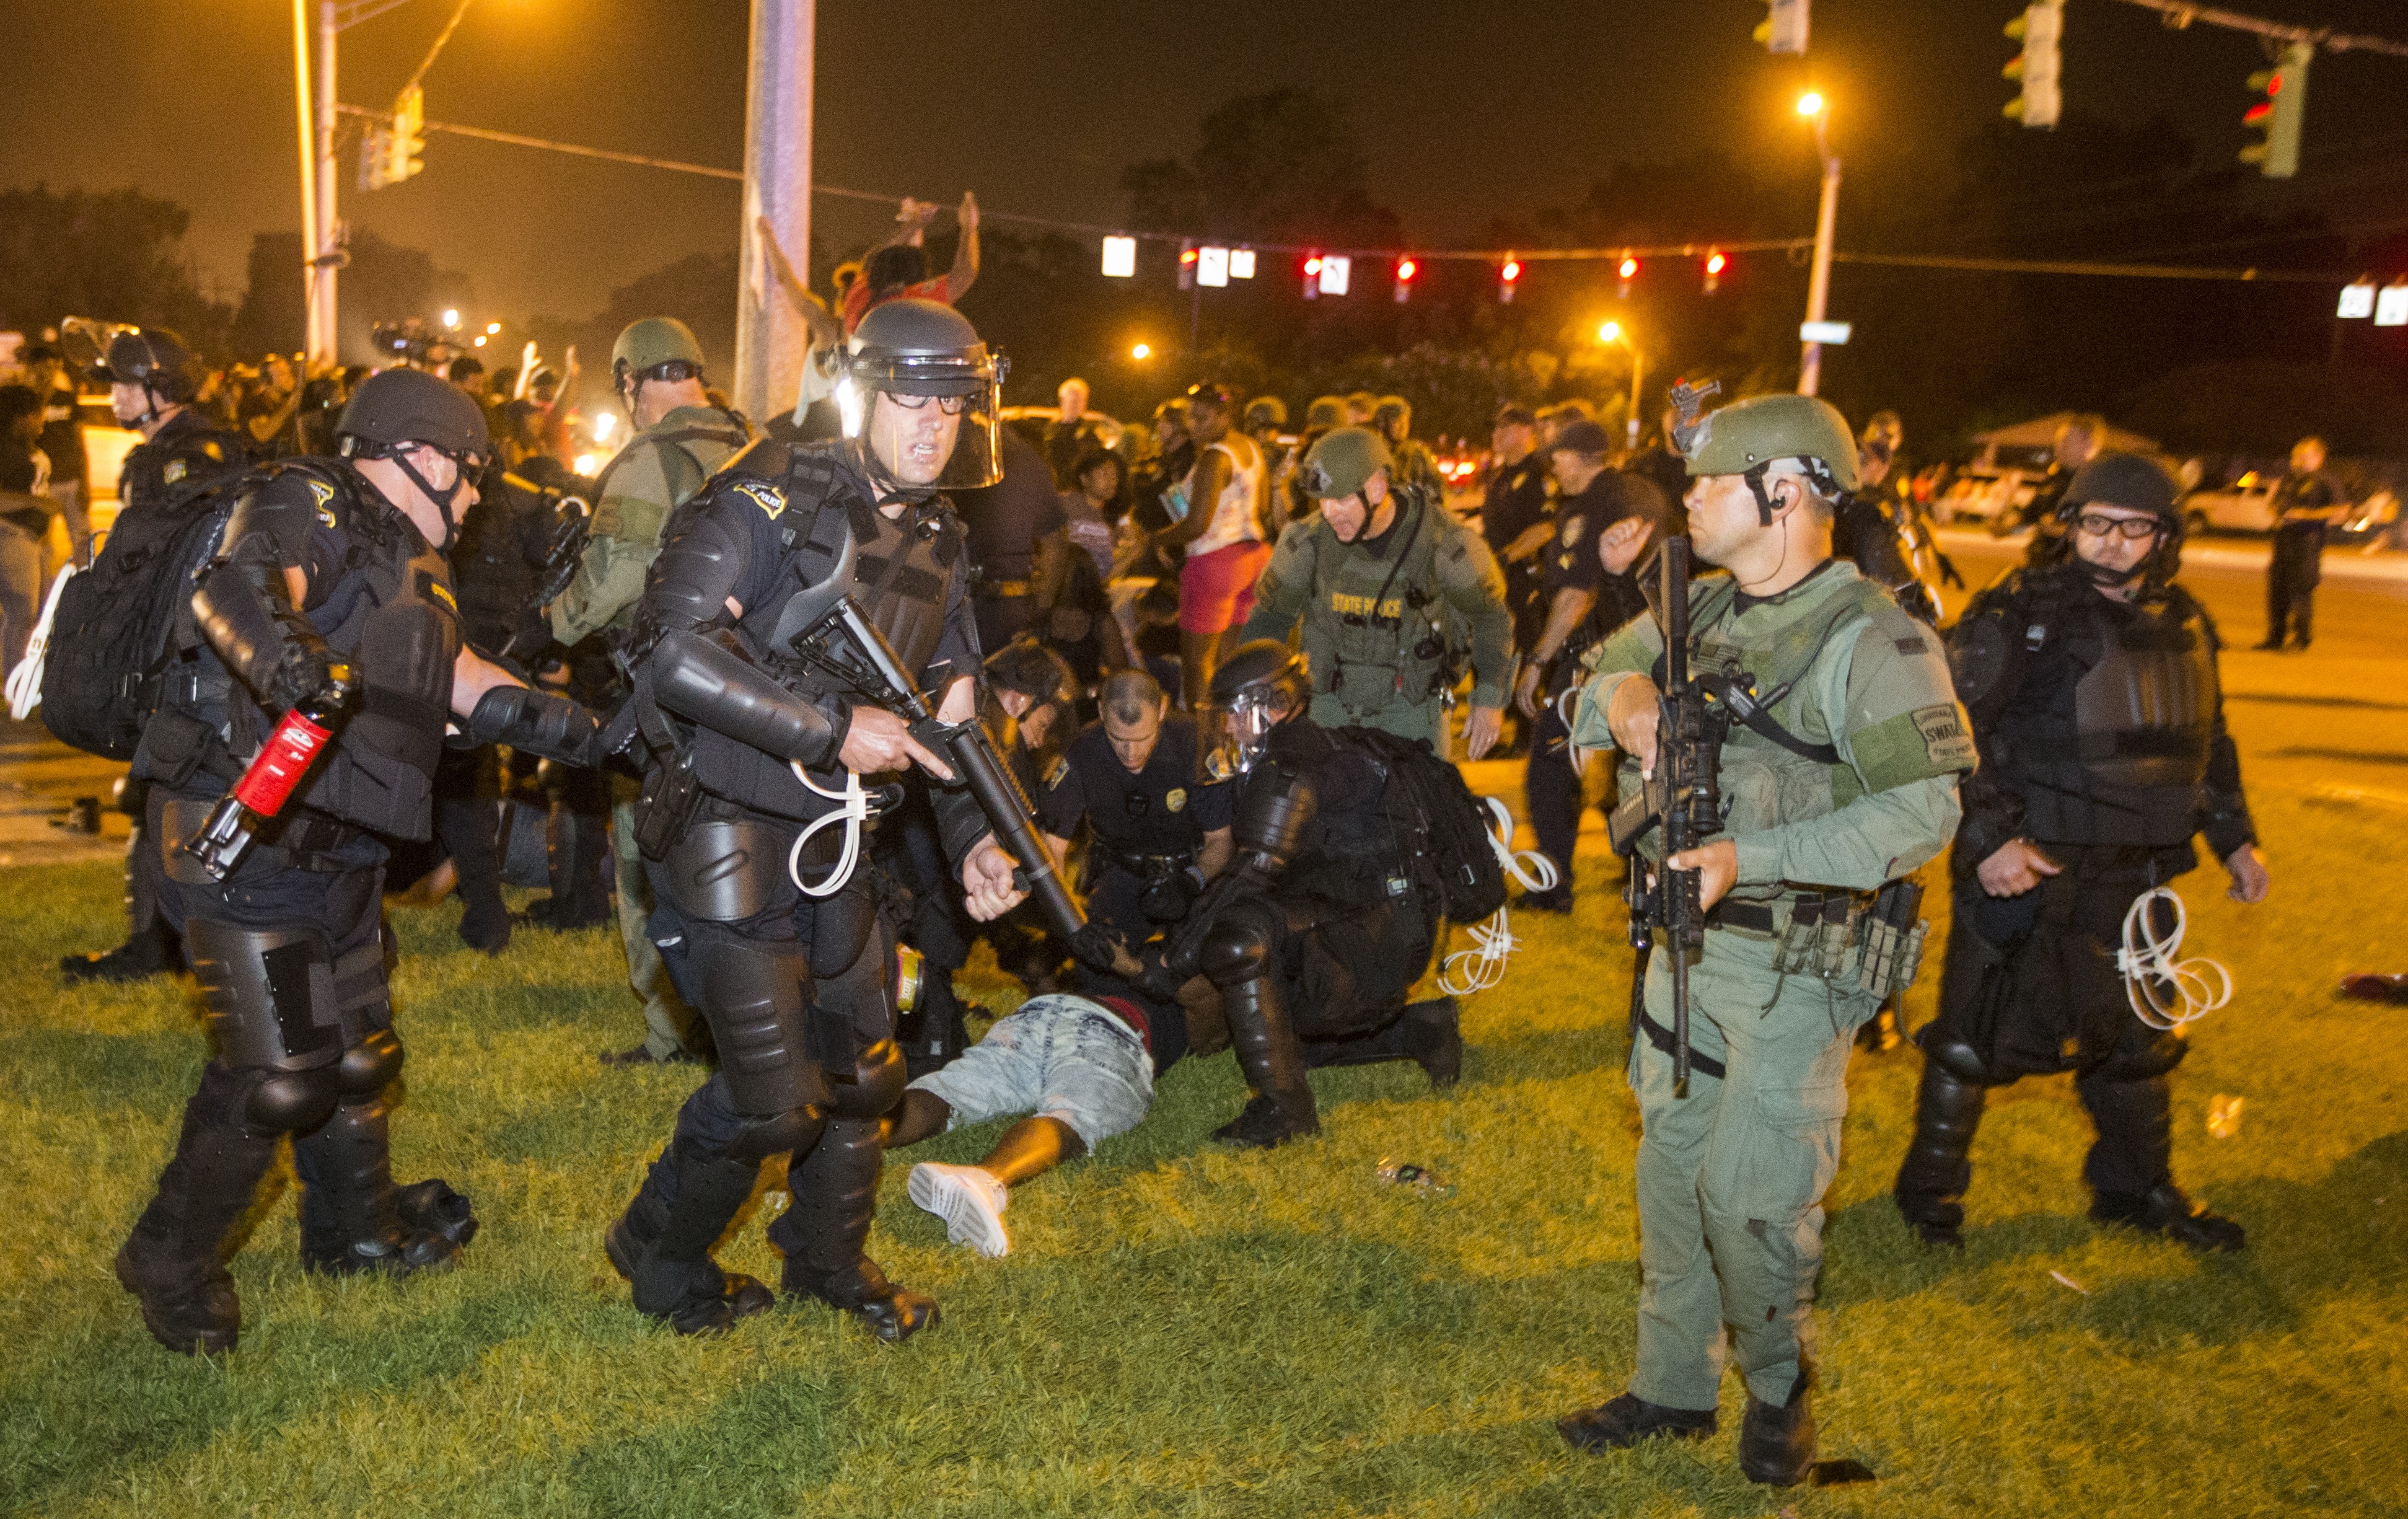 Baton Rouge police rush the crowd of protesters and start making arrest on July 9, 2016 in Baton Rouge, Louisiana.  (Getty)